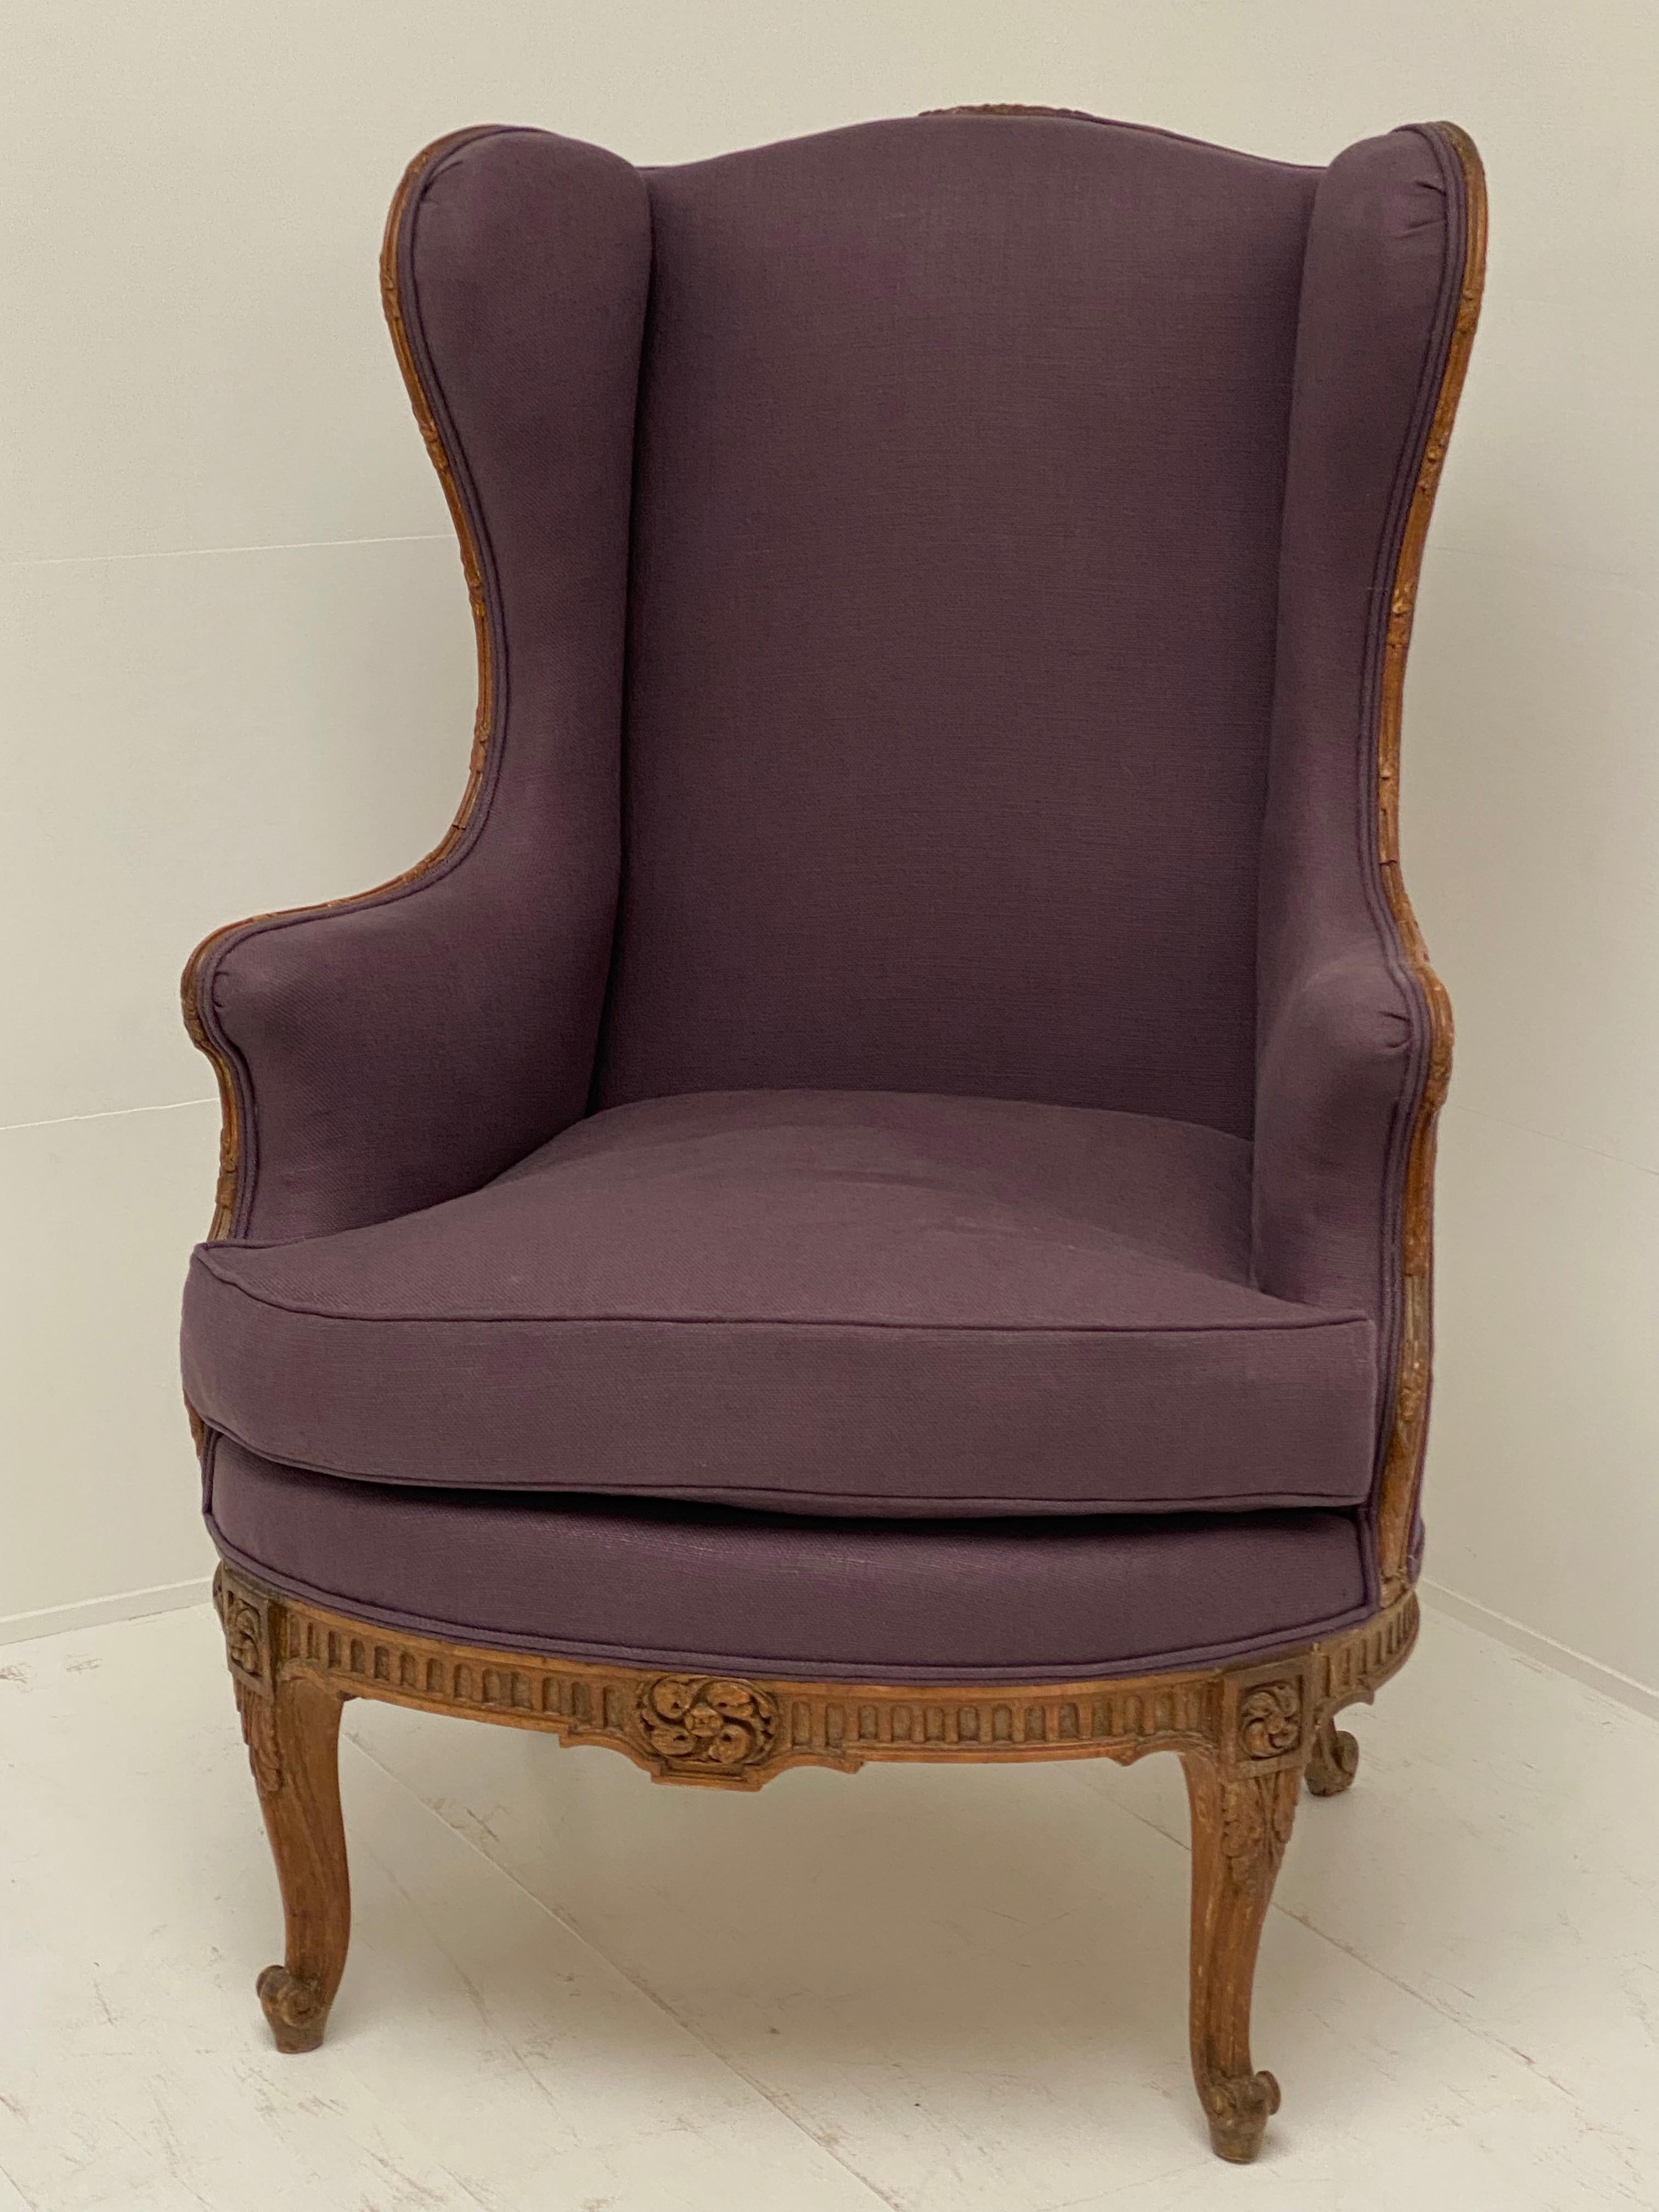 Very elegant French Armchair with nice carving and good old patina,
new Upholstery in a warm purple color.